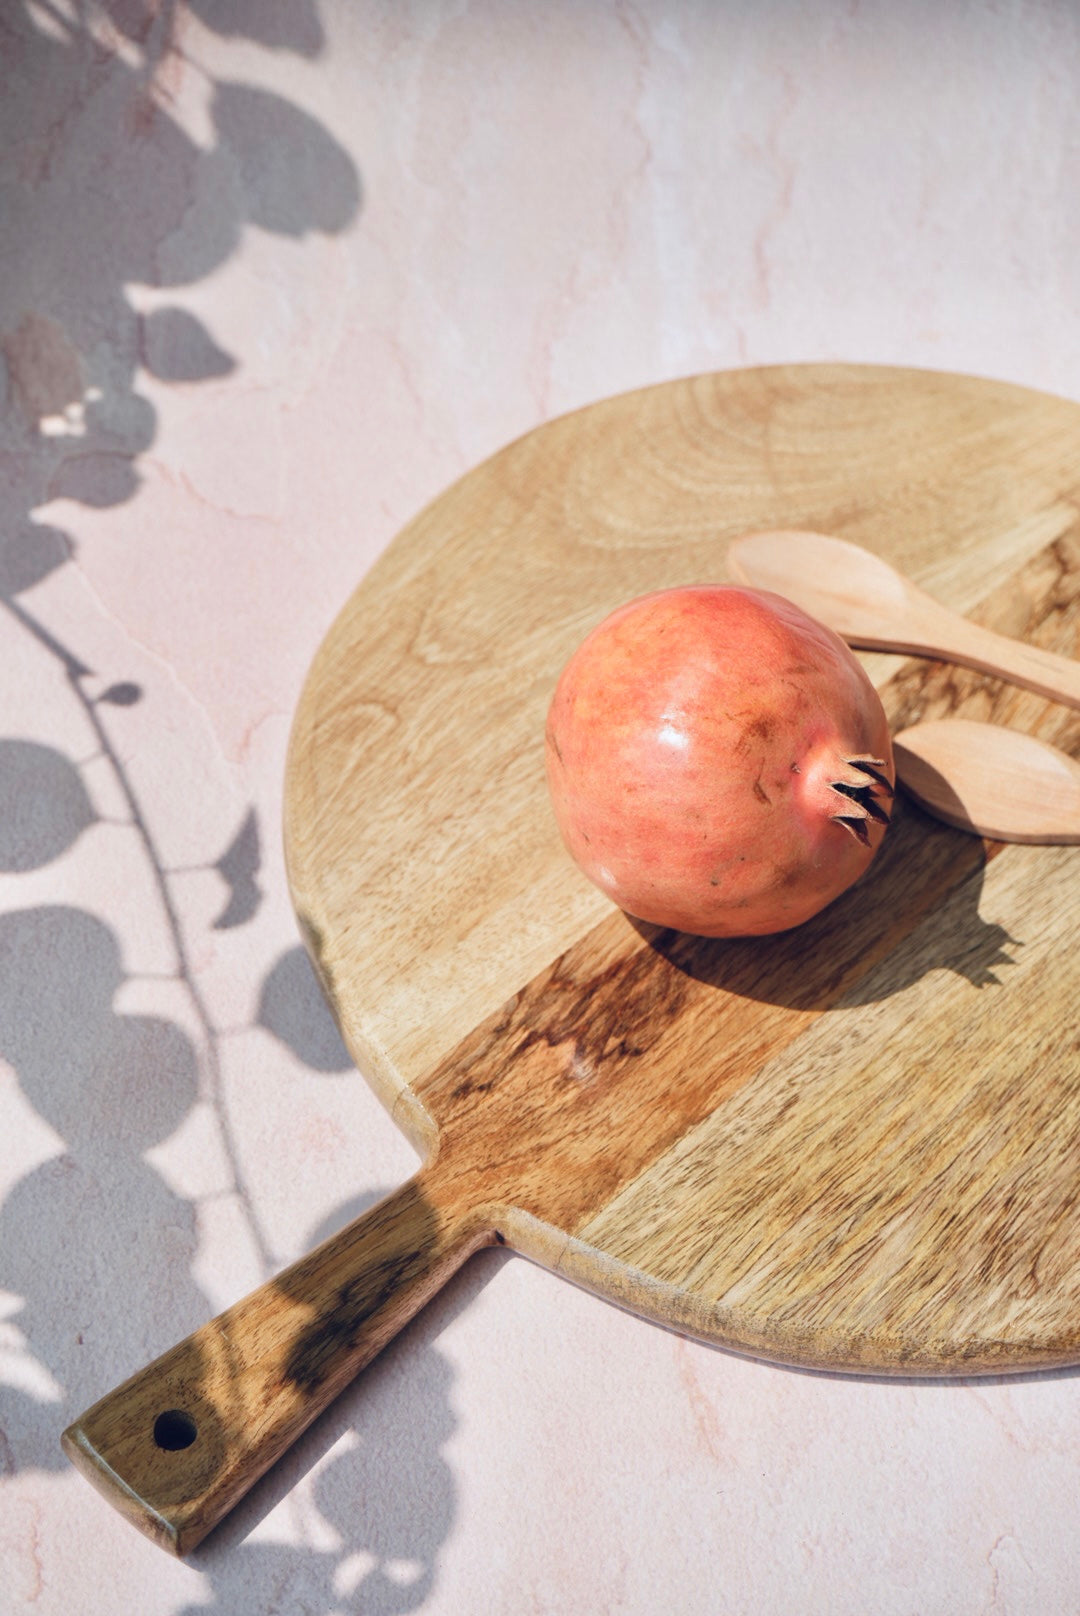 Round Wooden Chopping Board